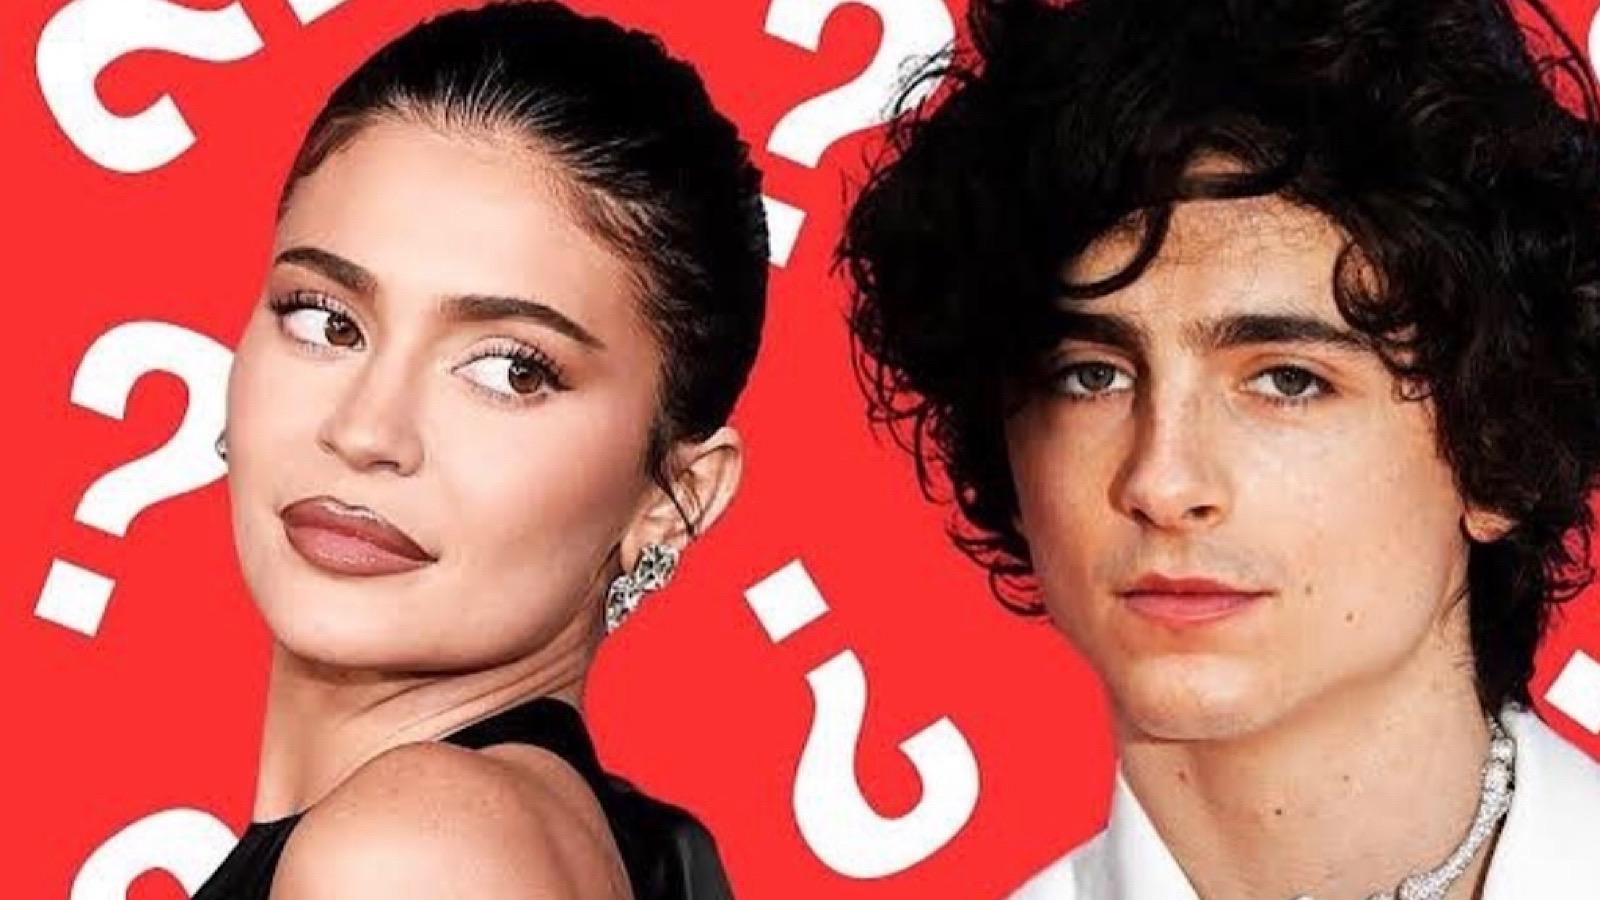 Are Kylie Jenner and Timothee Chalamet still dating?